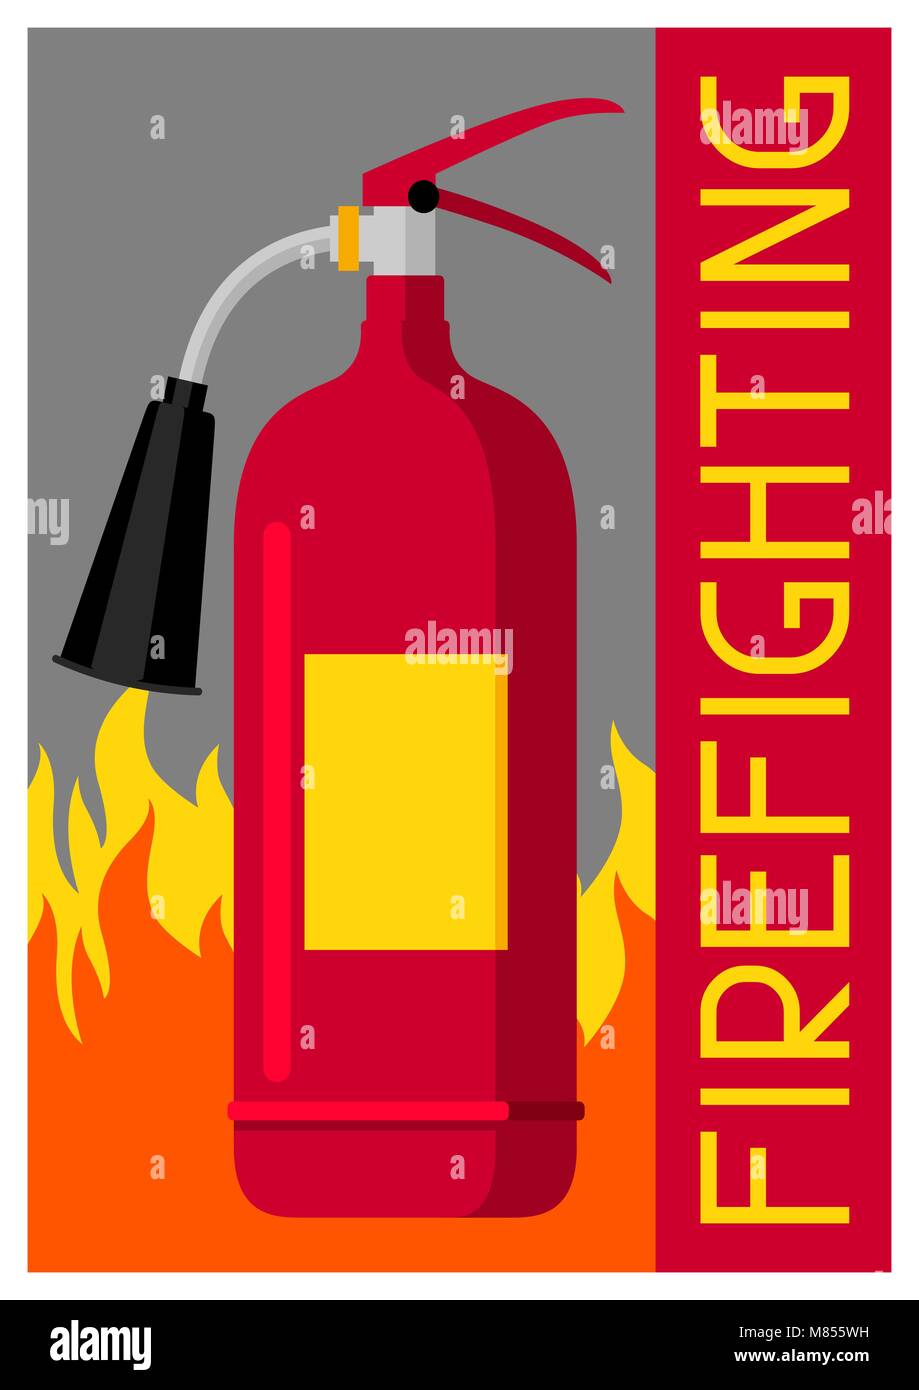 fire-safety-posters-printable